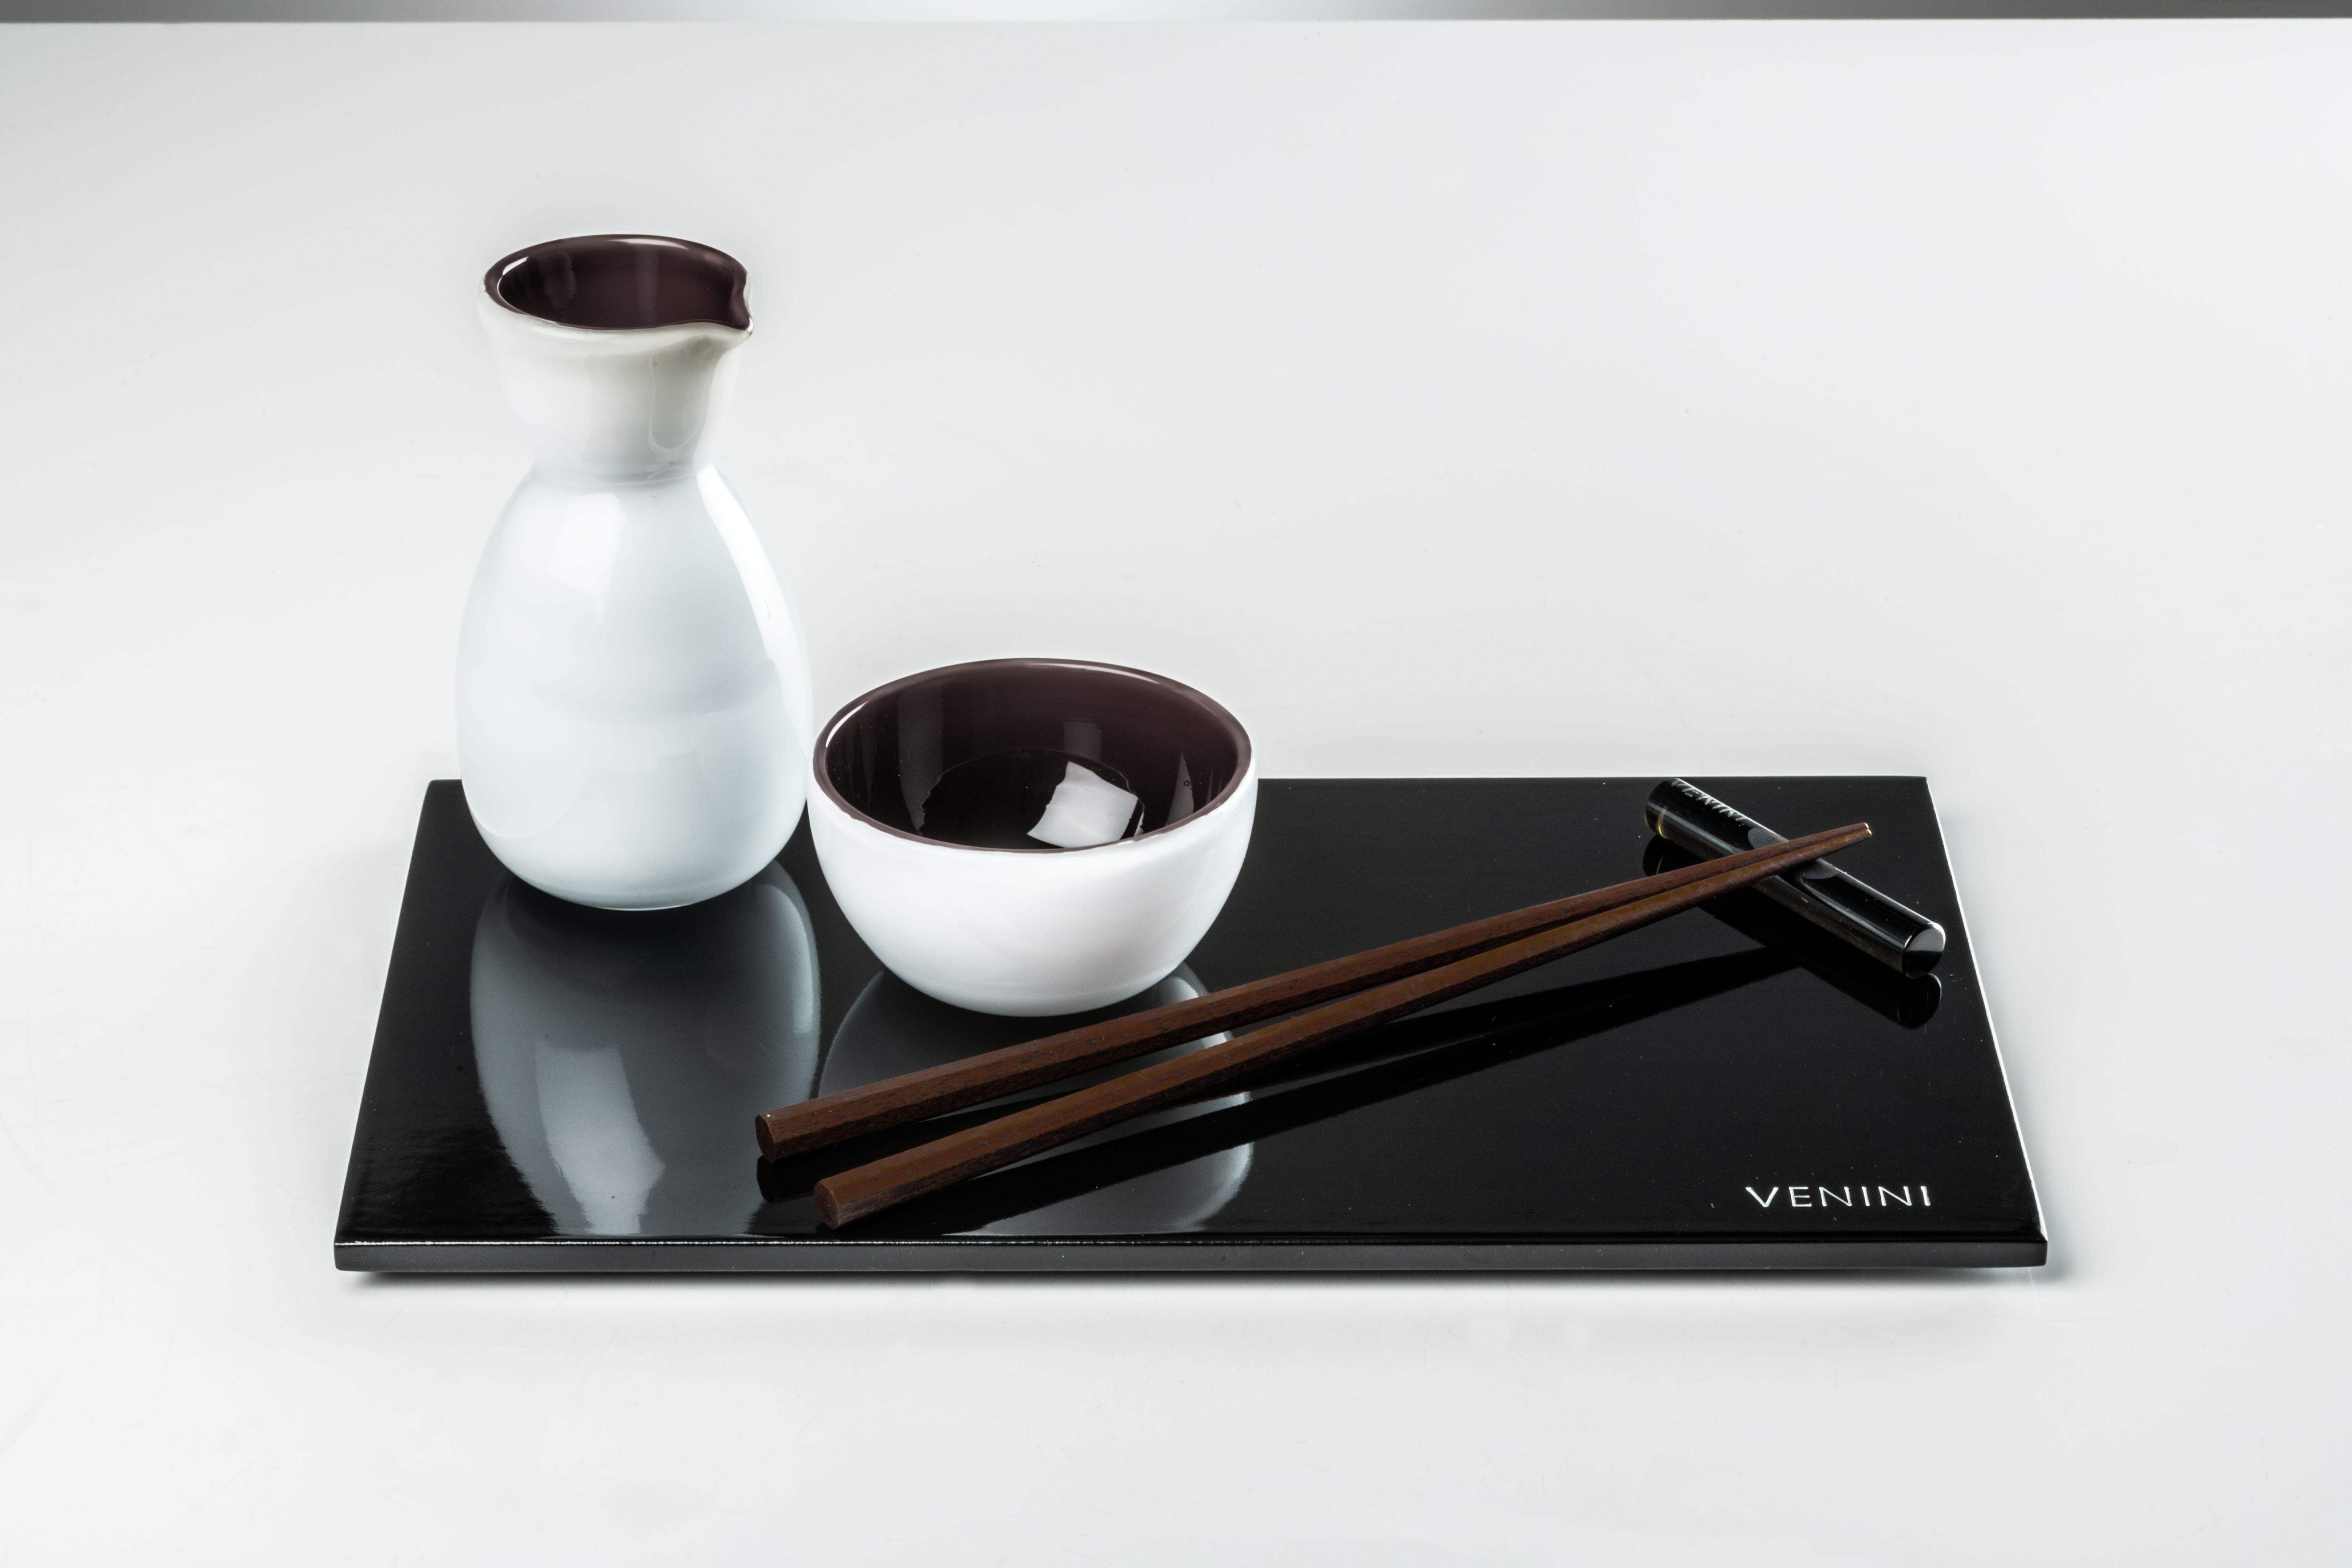 This sushi set designed by Venini is comprised of lacquered plate, wooden chopsticks, cruet, a glass bowl, and a glass chopstick holder.